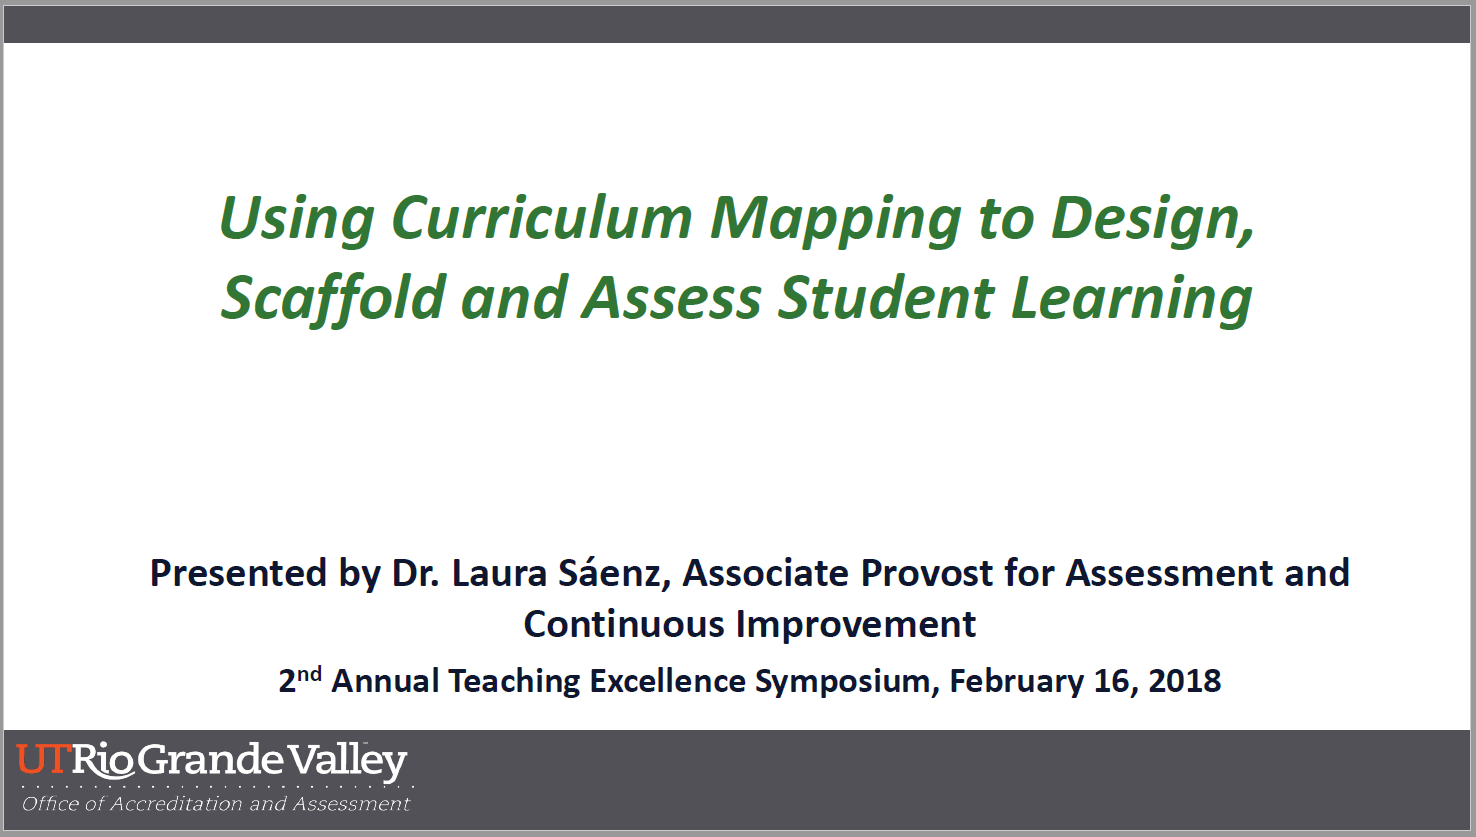 Using Curriculum Mapping to Design, Scaffold and Assess Student Learning | Presented by Dr. Laura Saenz, Associate Provost for Assessment and Continuous Improvement, Second annual Teaching Excellence Symposium, February 16, 2018